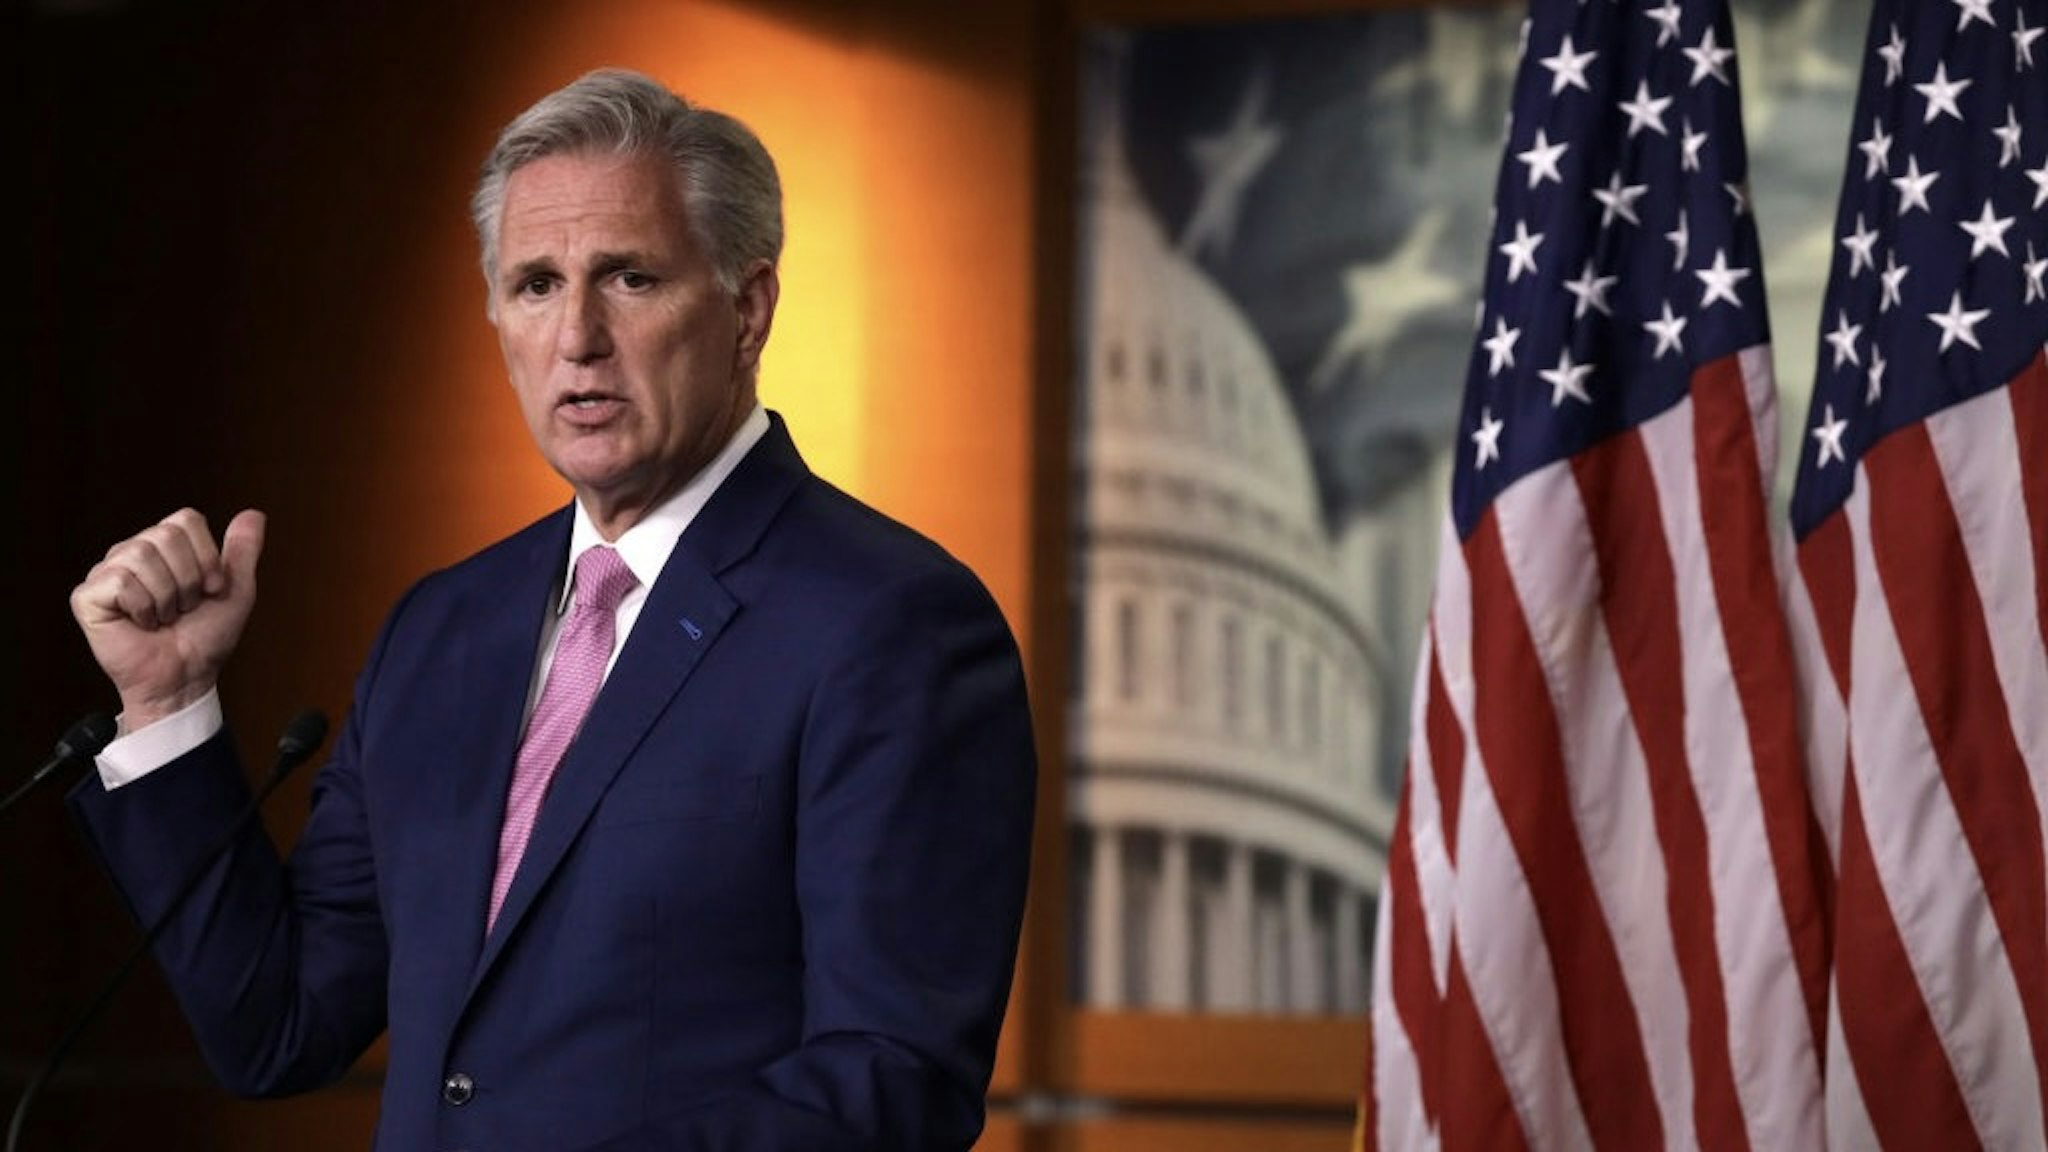 Minority Leader McCarthy Holds Weekly Press Conference WASHINGTON, DC - MAY 28: U.S. House Minority Leader Rep. Kevin McCarthy (R-CA) speaks during a weekly news conference May 28, 2020 on Capitol Hill in Washington, DC. McCarthy held news conference to fill questions from members of the press. (Photo by Alex Wong/Getty Images) Alex Wong / Staff